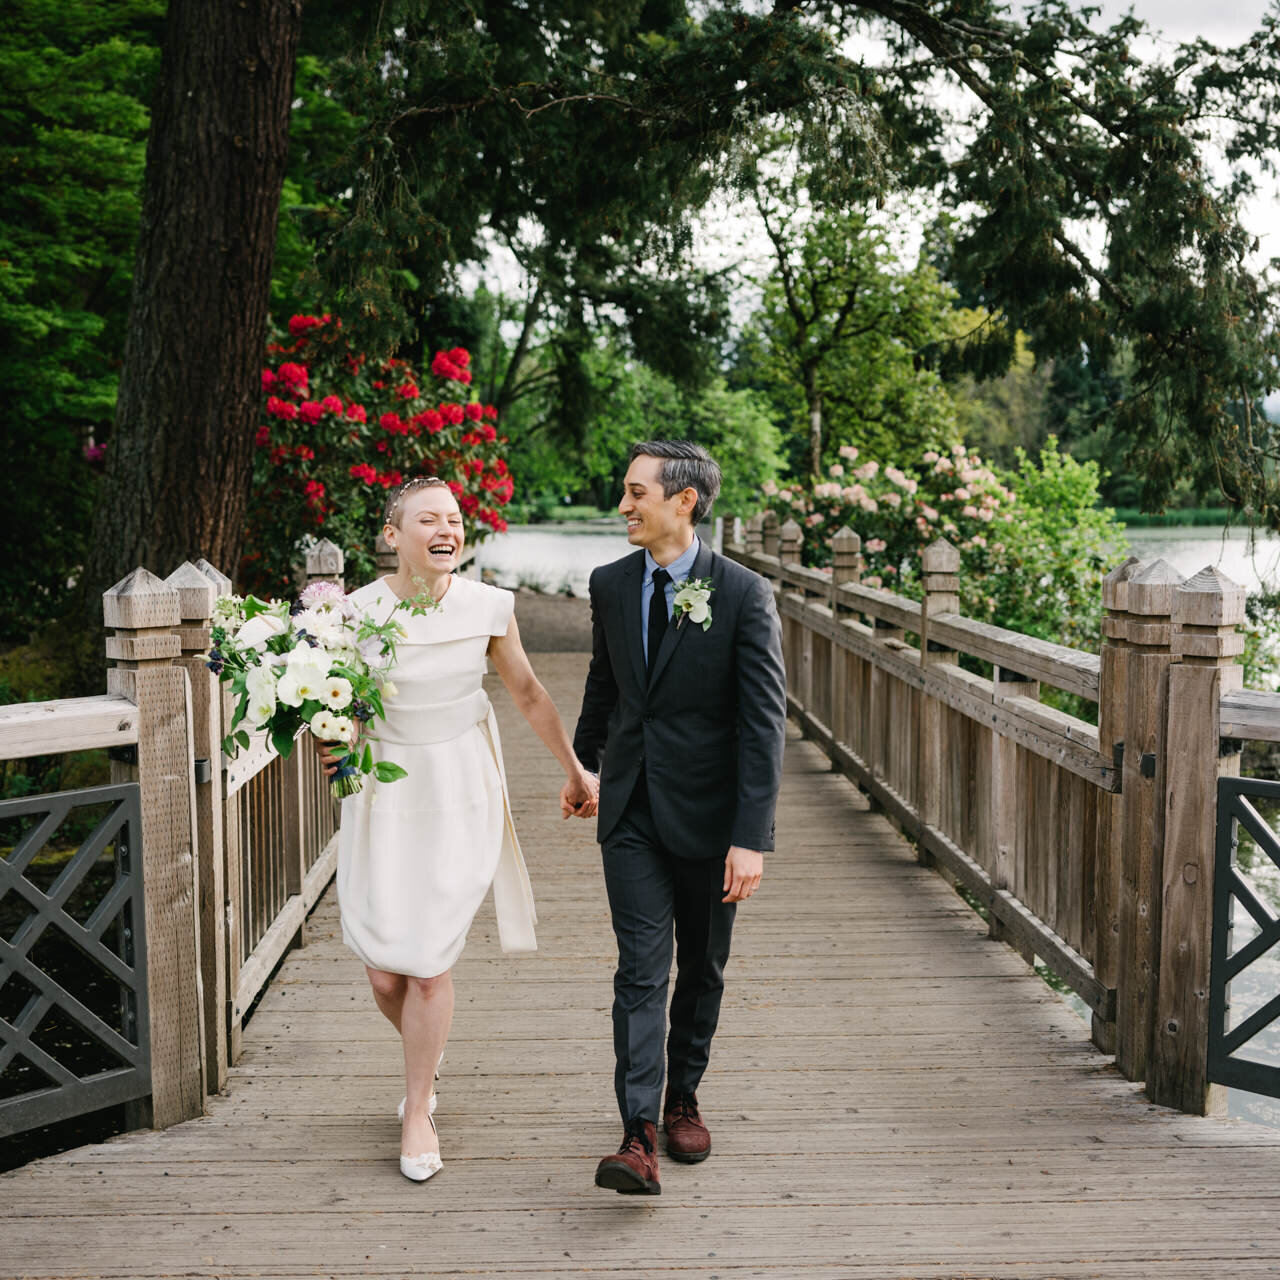  Holding hands across crystal springs bridge, bride laughs while holding large white bouquet 